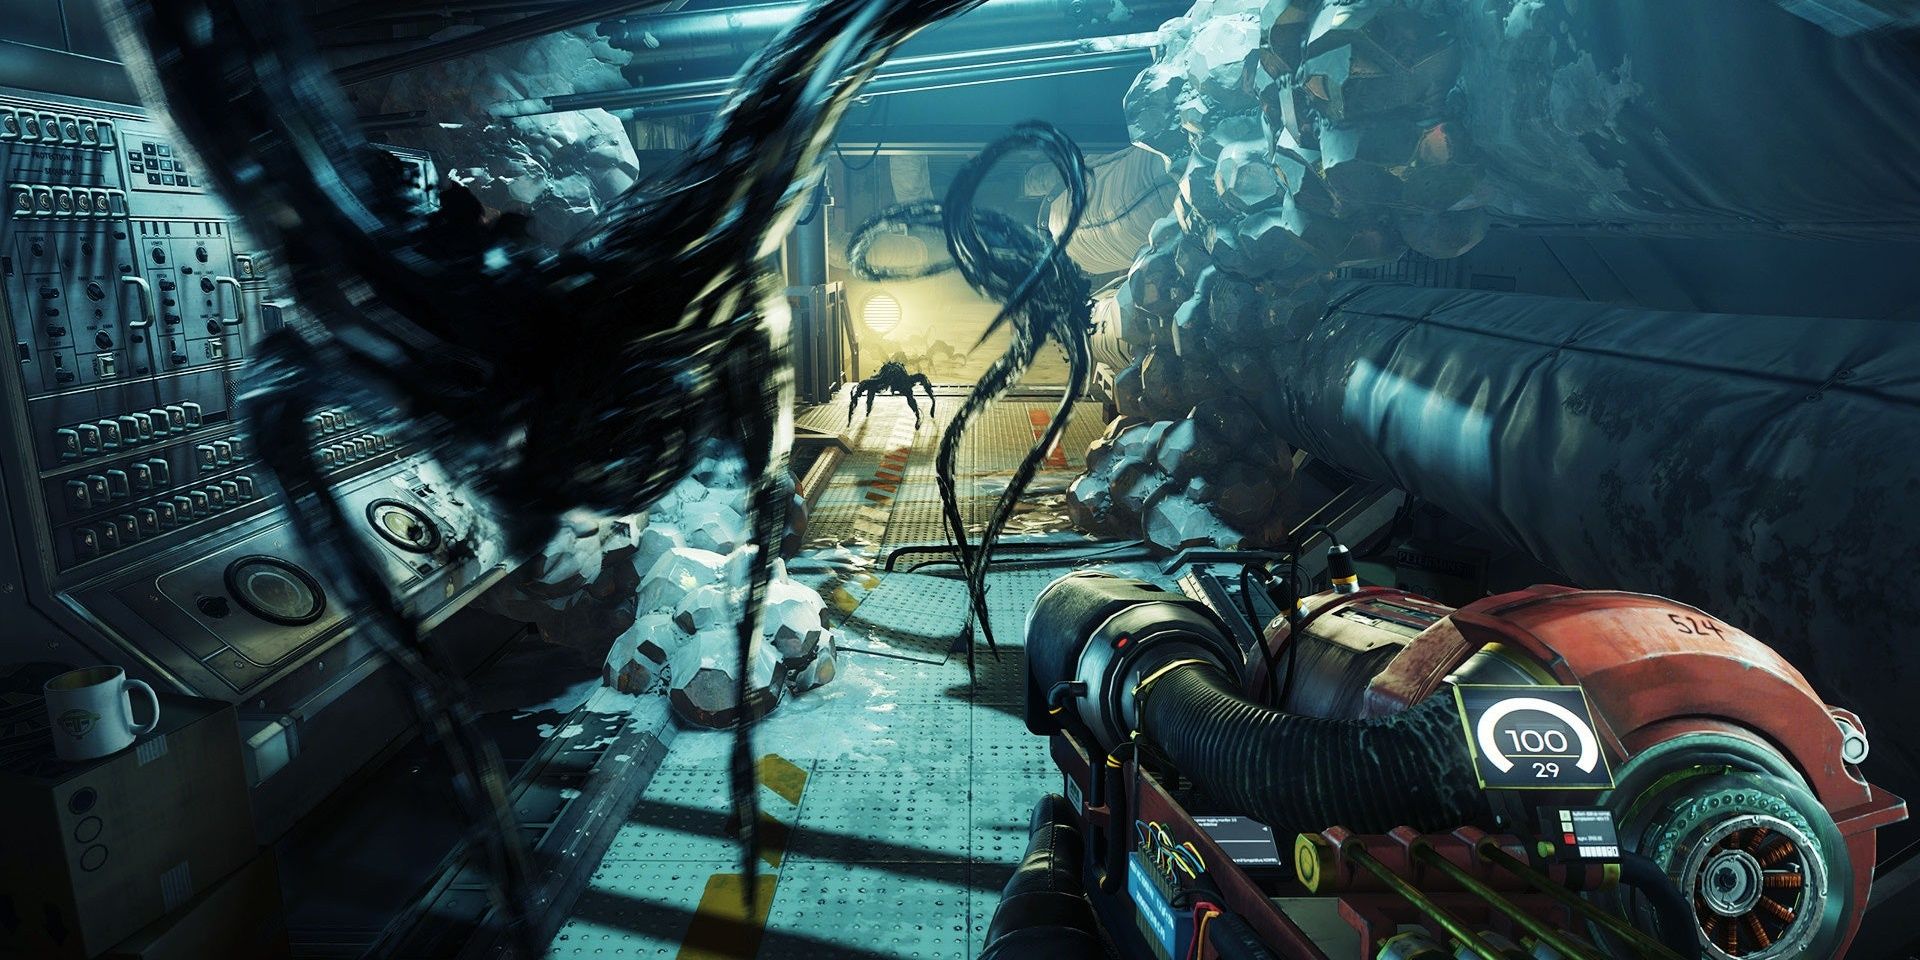 The water area in Prey